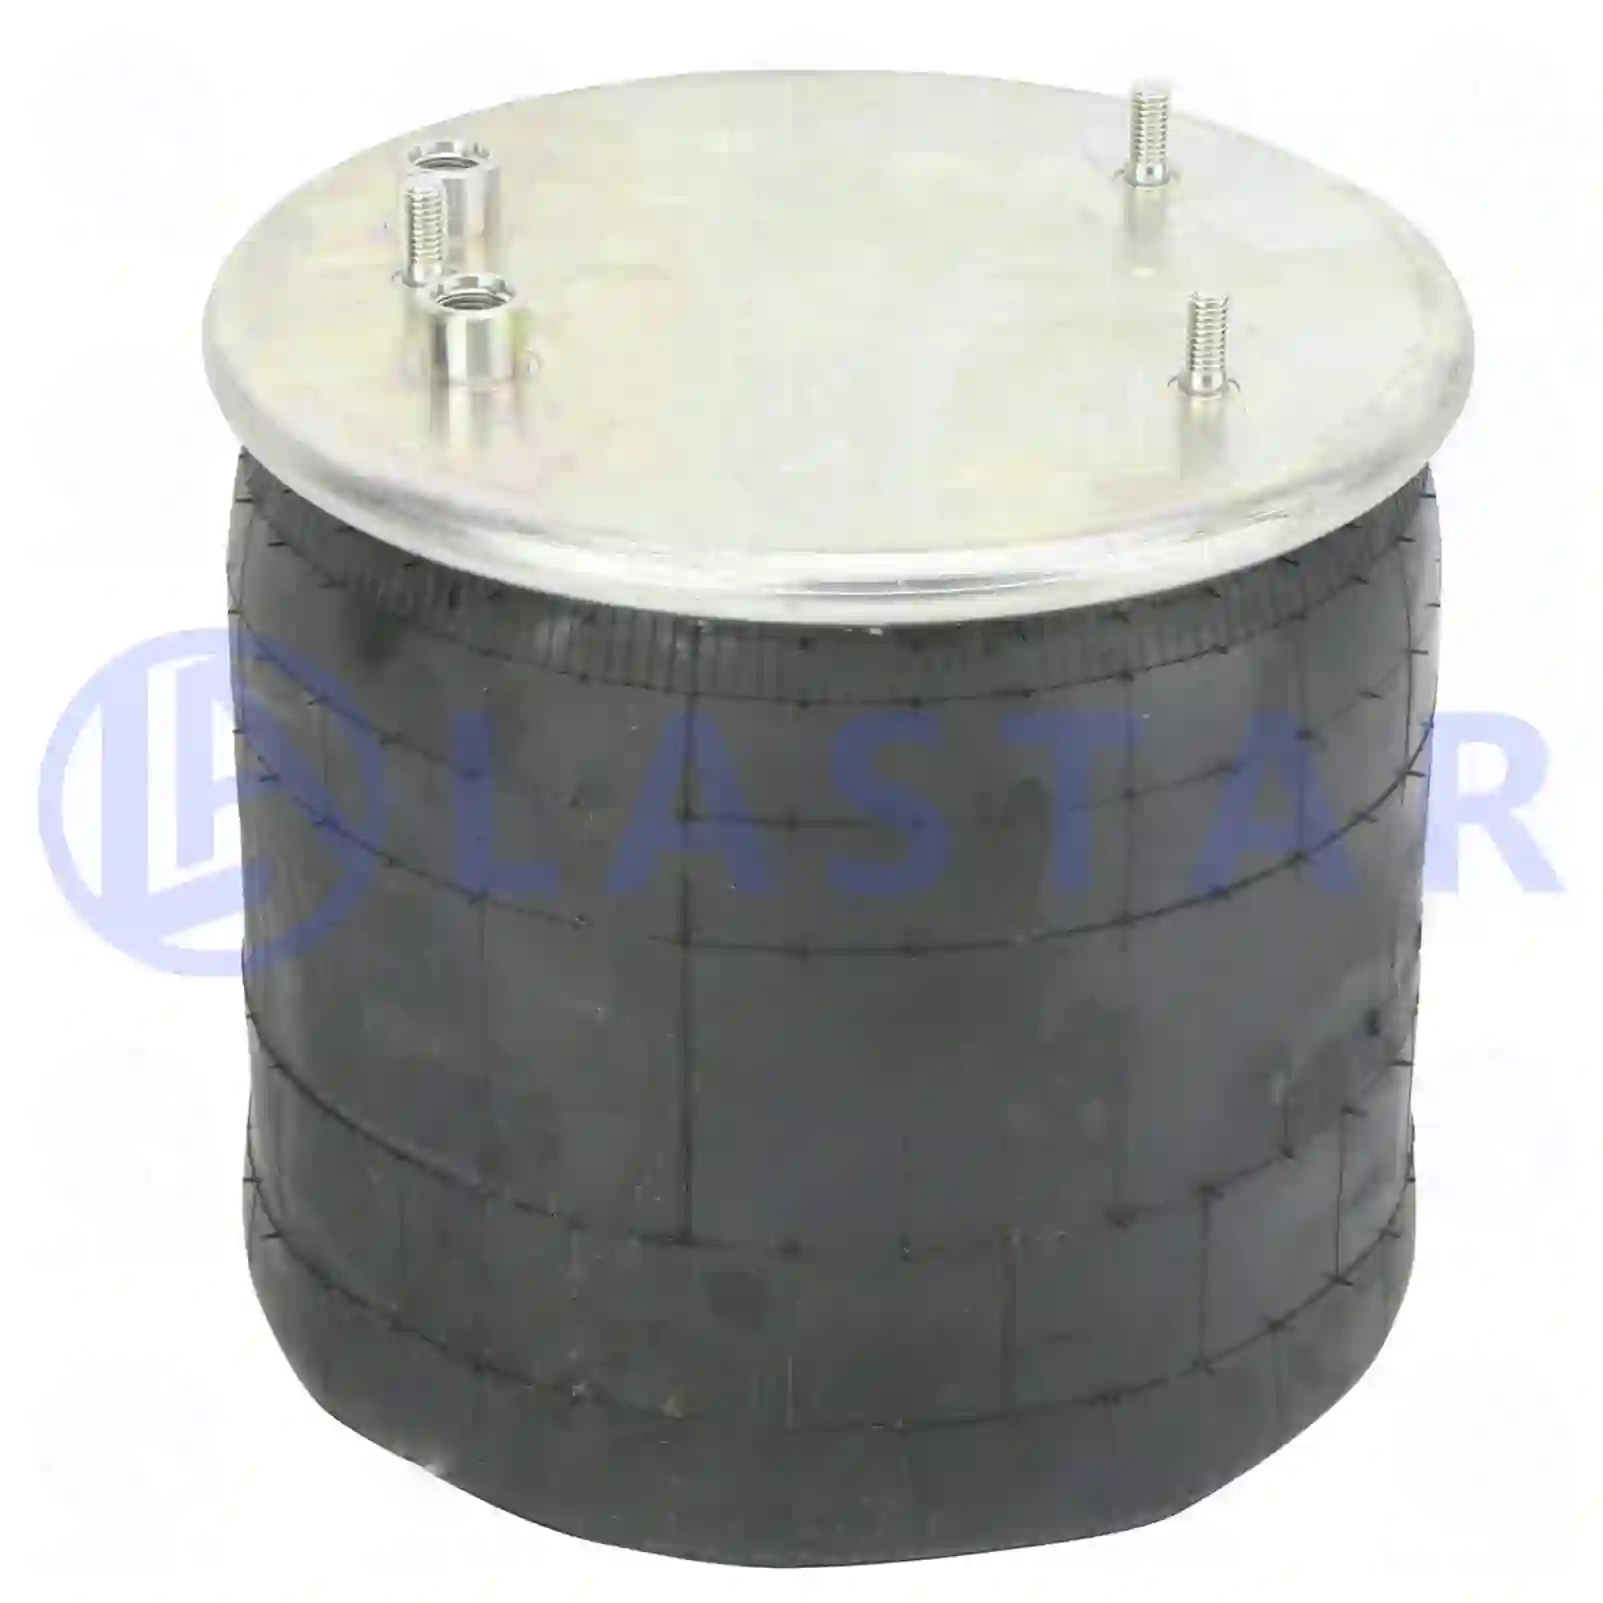 Air spring, without piston, 77728500, 0513982, 513982, MLF7019 ||  77728500 Lastar Spare Part | Truck Spare Parts, Auotomotive Spare Parts Air spring, without piston, 77728500, 0513982, 513982, MLF7019 ||  77728500 Lastar Spare Part | Truck Spare Parts, Auotomotive Spare Parts